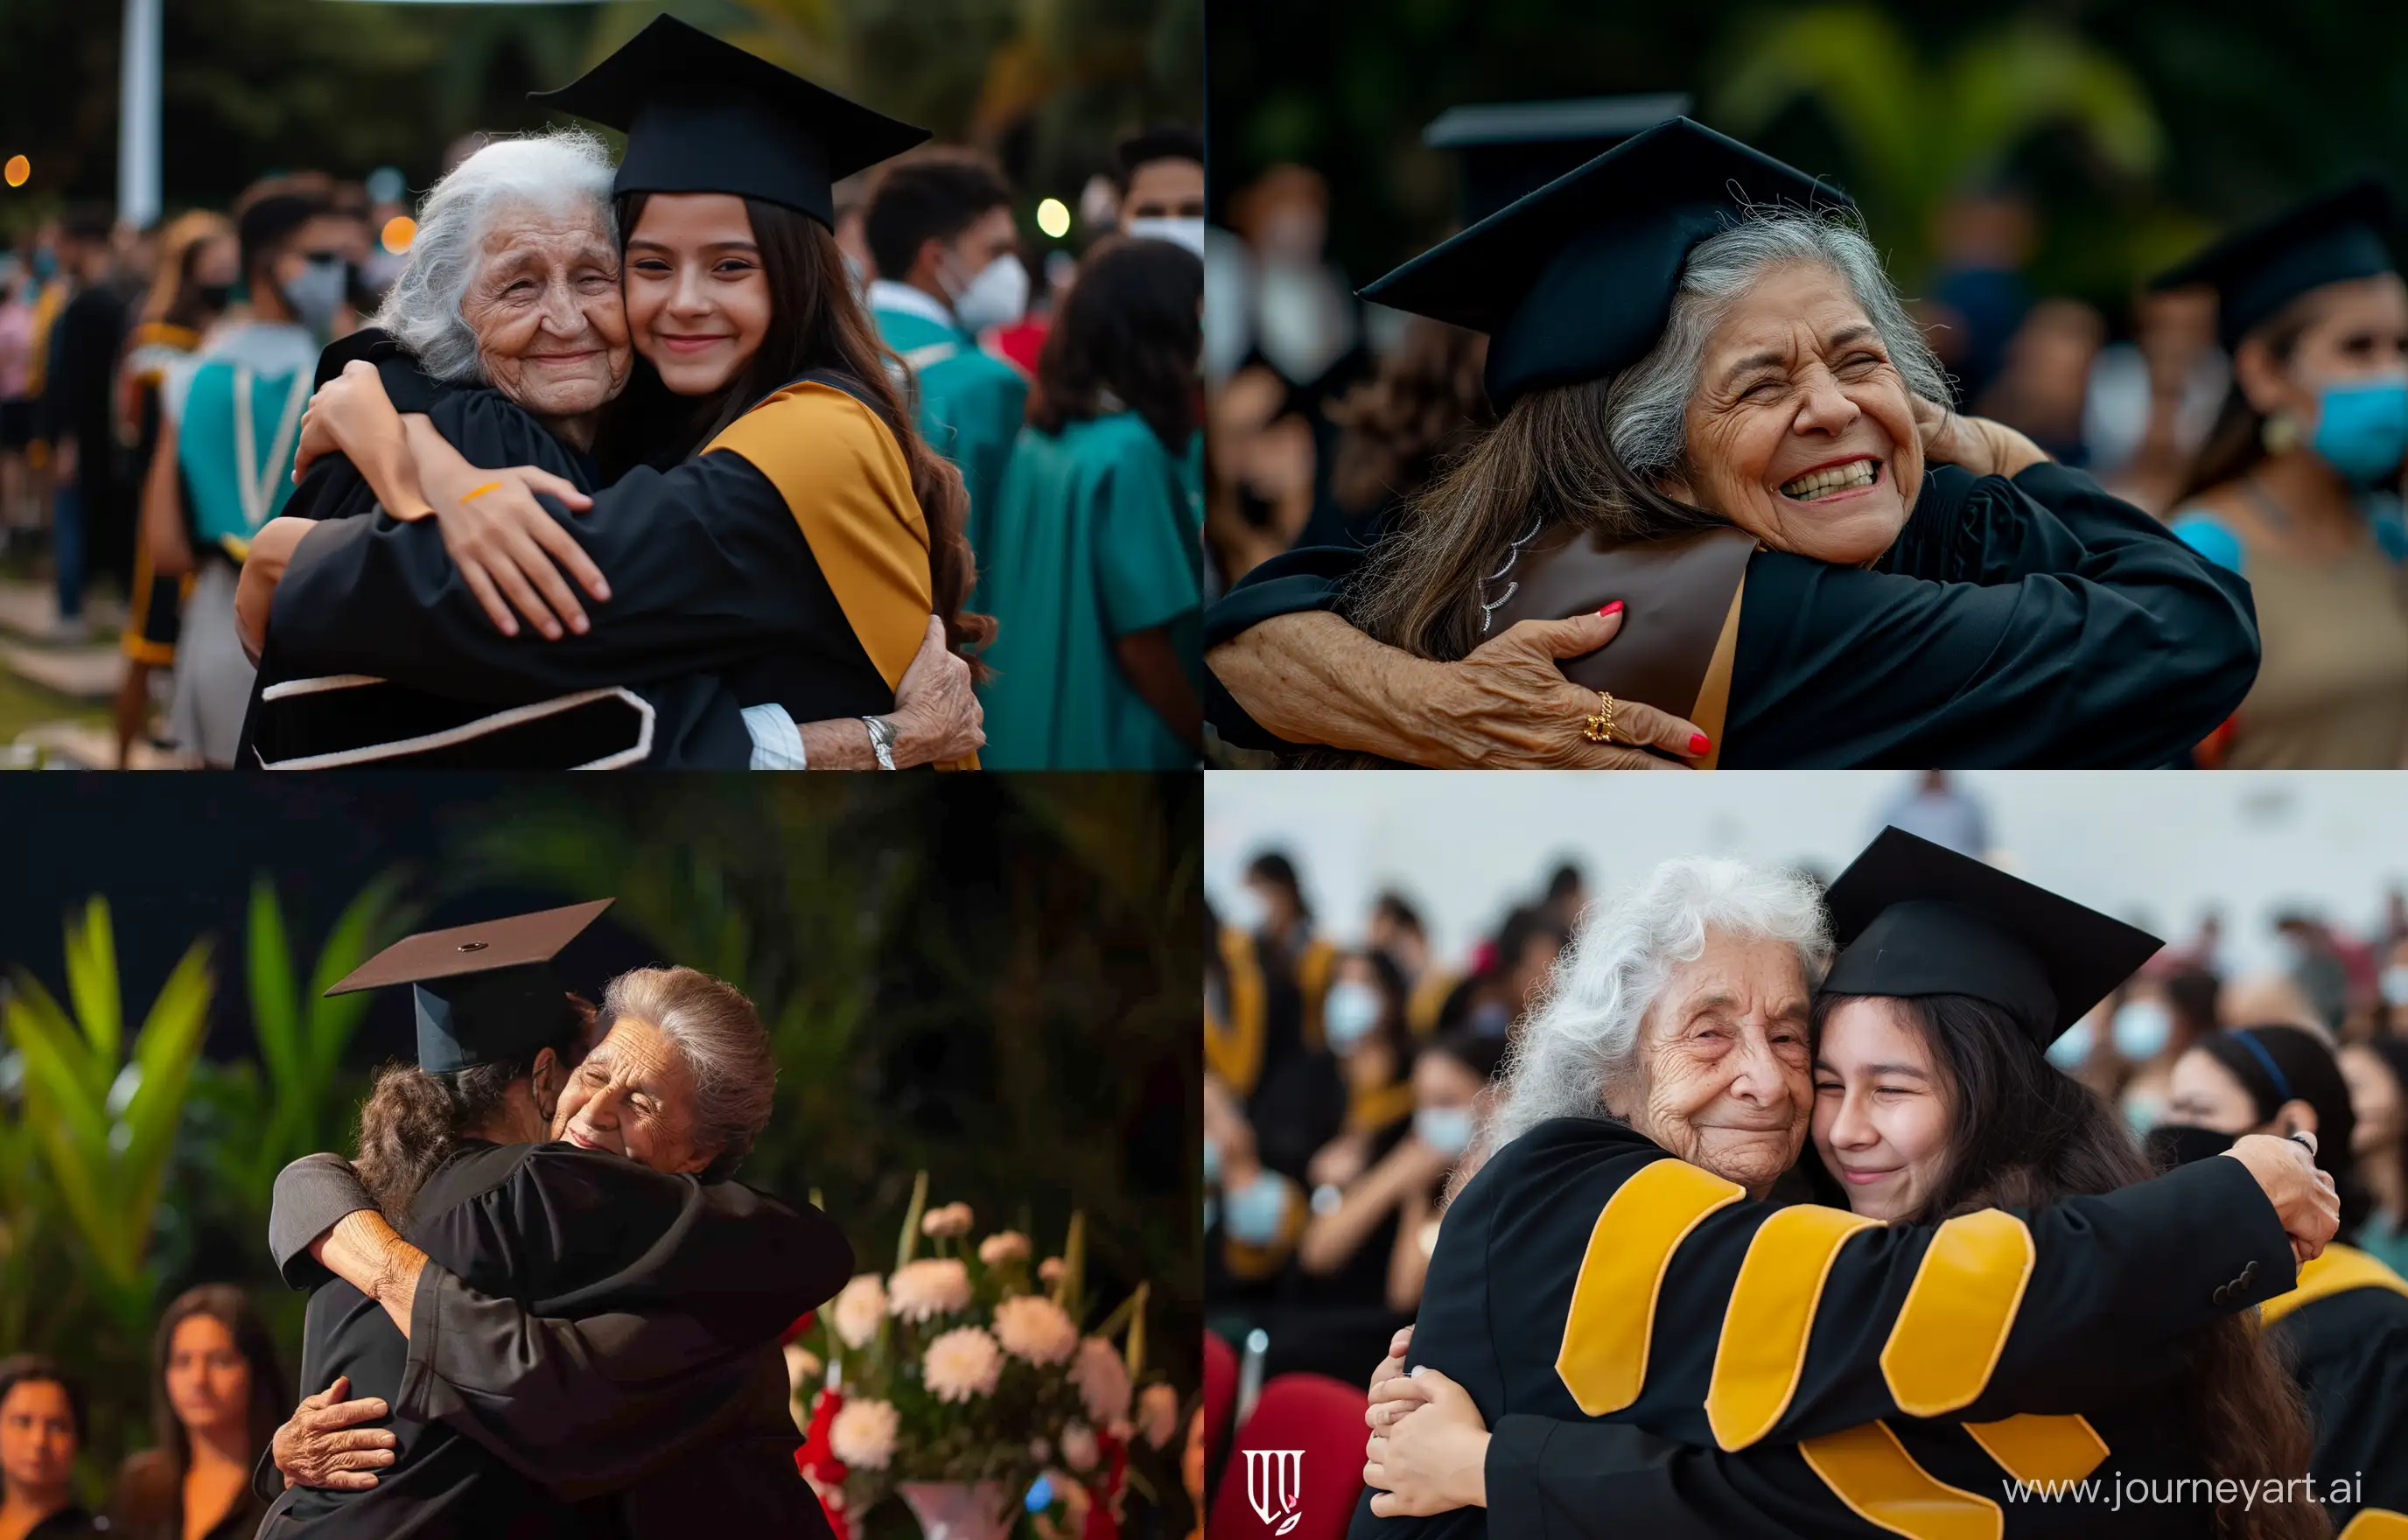 Photo taken in Pelotas, RS, Brazil, 10/27/2020, that shows a 59y woman hugging her 21y granddaughter at graduation from the faculty of biomedicine --v 6 --ar 14:9 --style raw